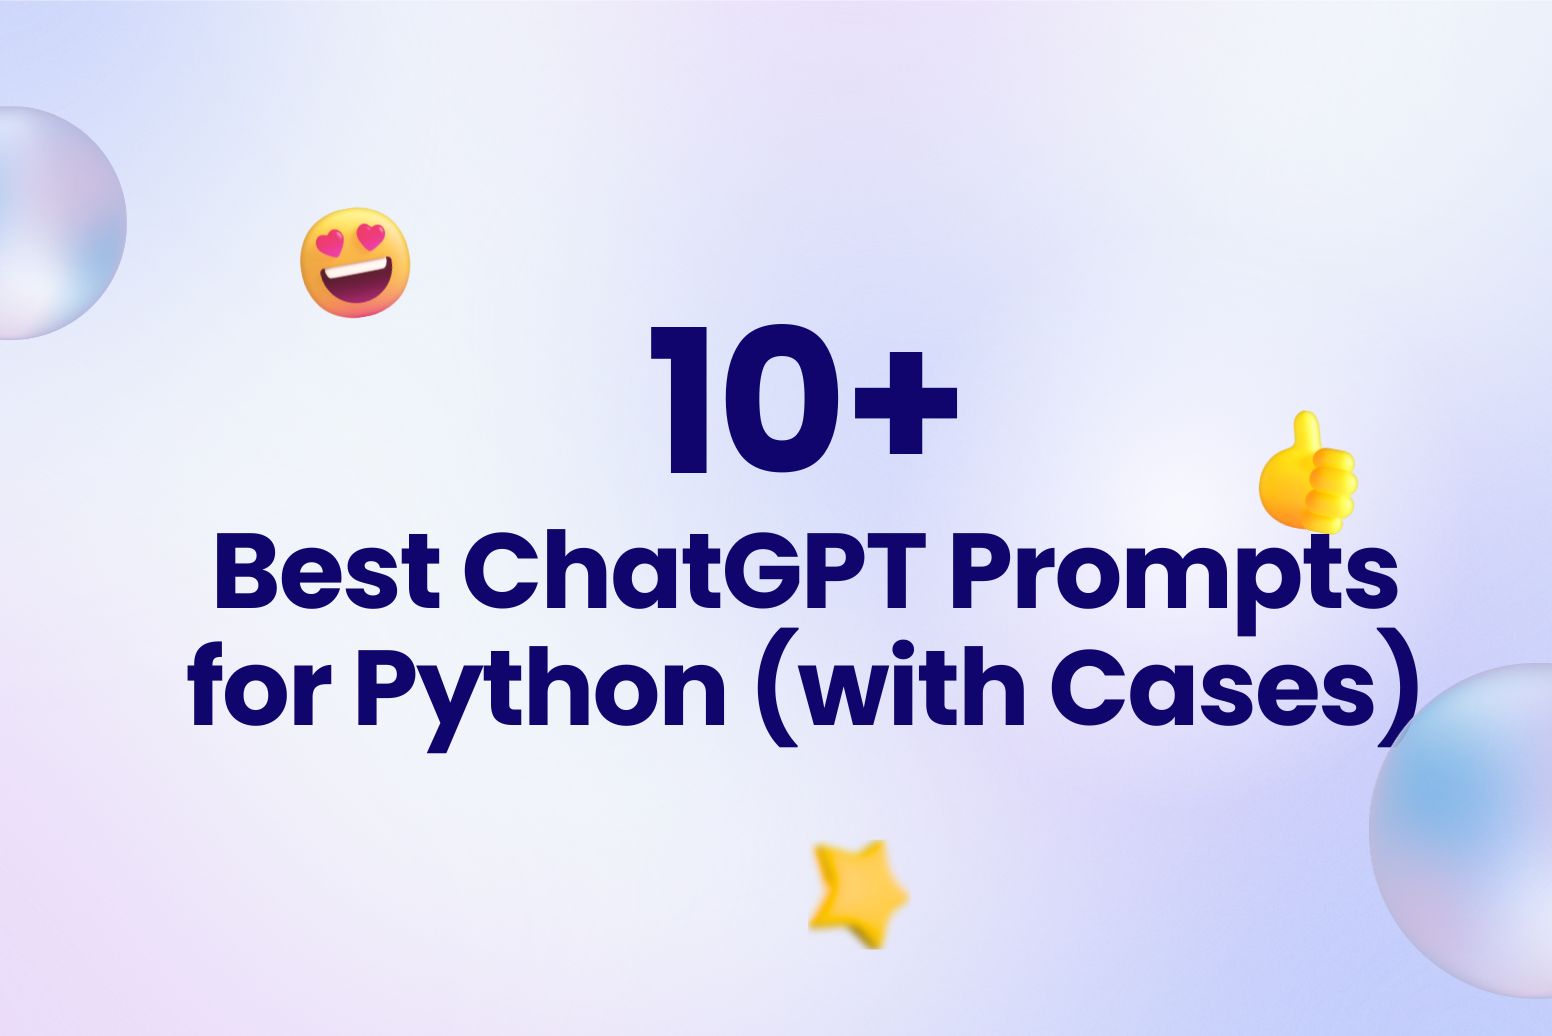 10+ Best ChatGPT Prompts for Python (with Cases)